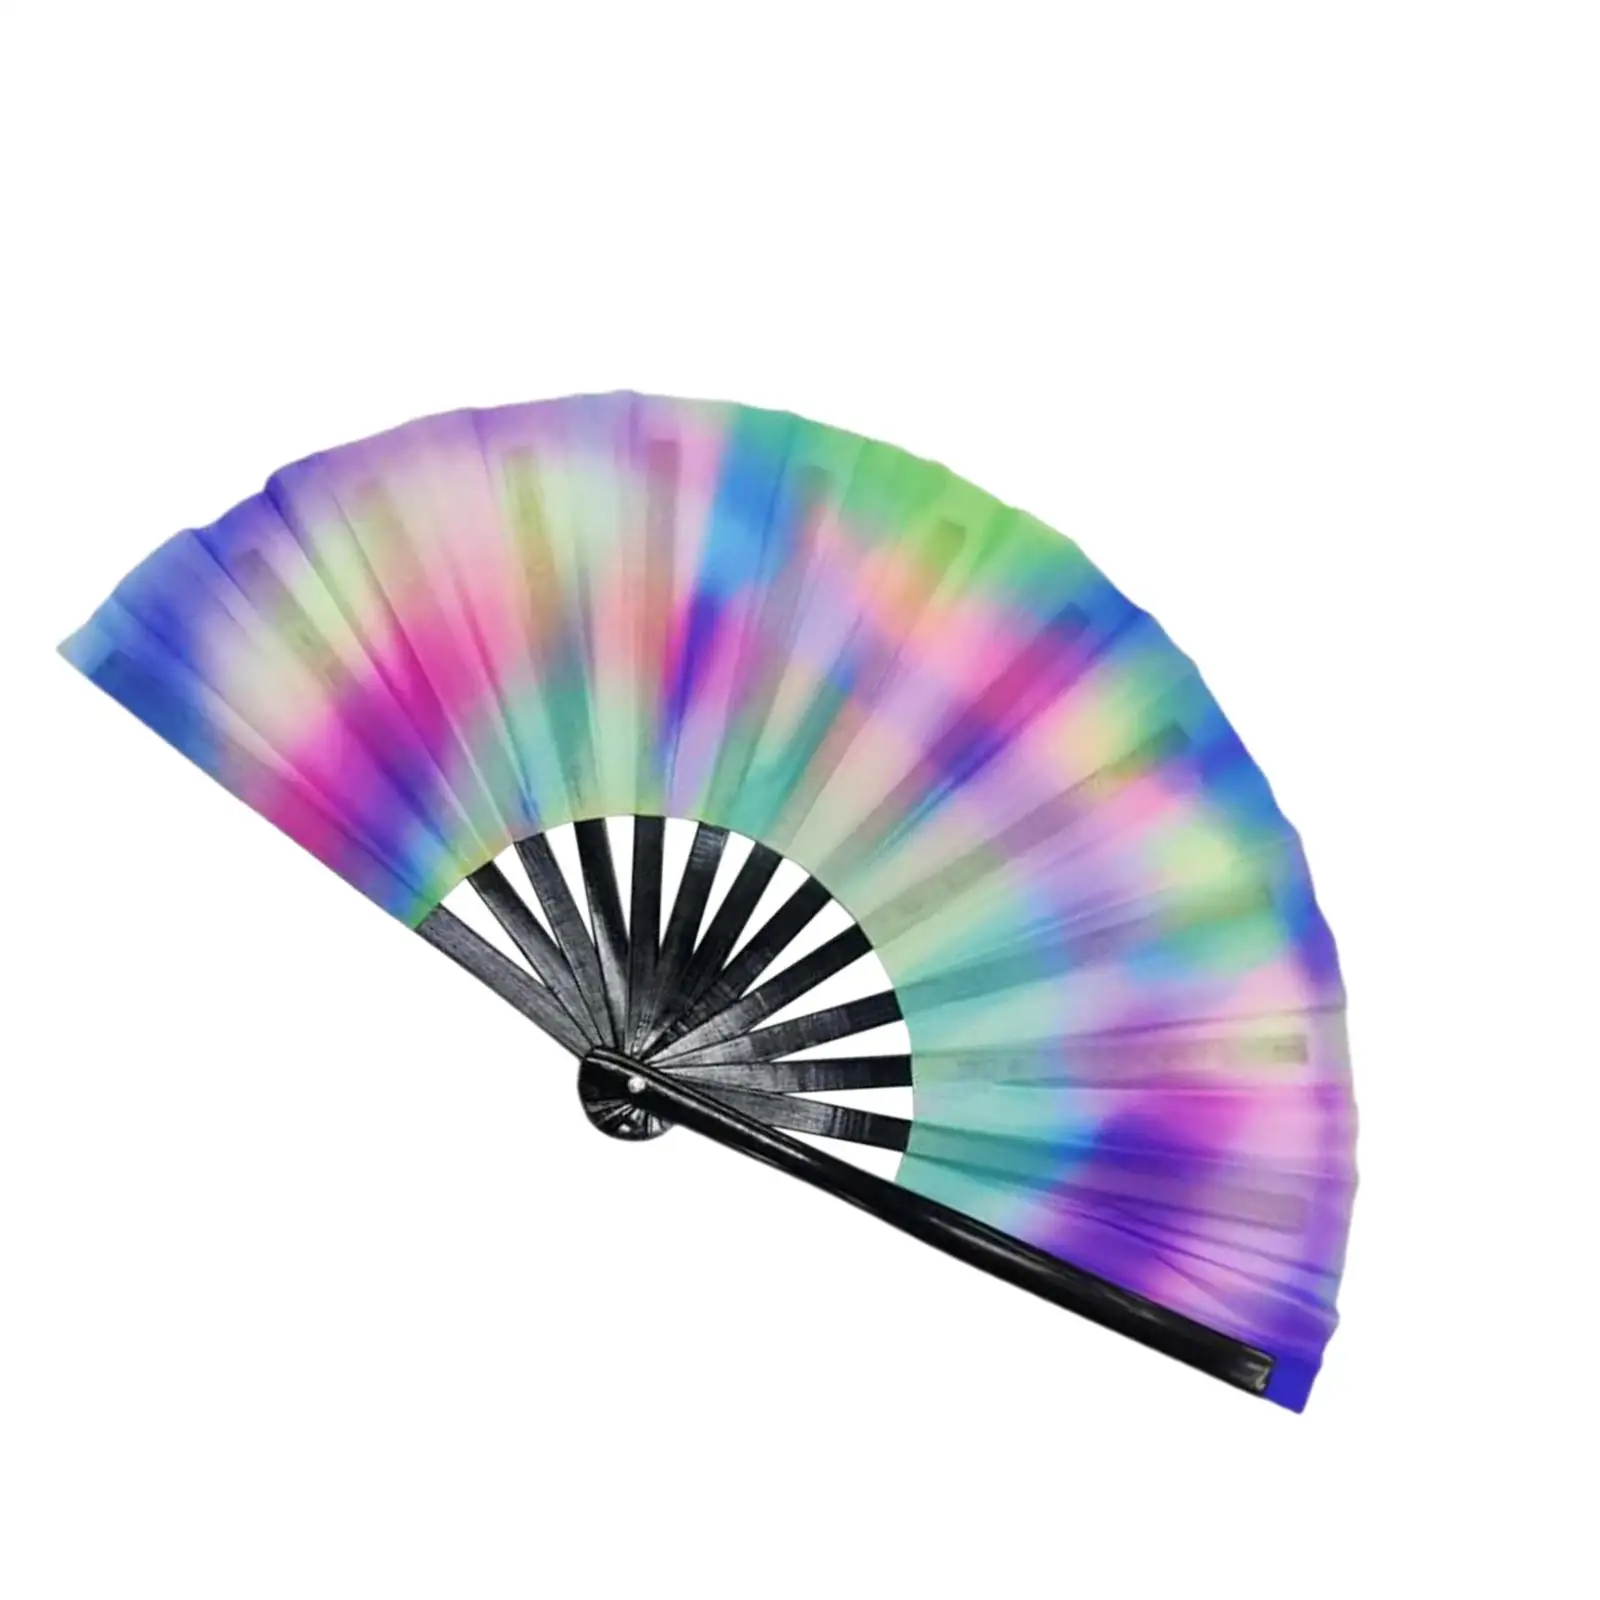 Large Rave Folding Hand Fan Fluorescent Effects for Dancing Props Parties